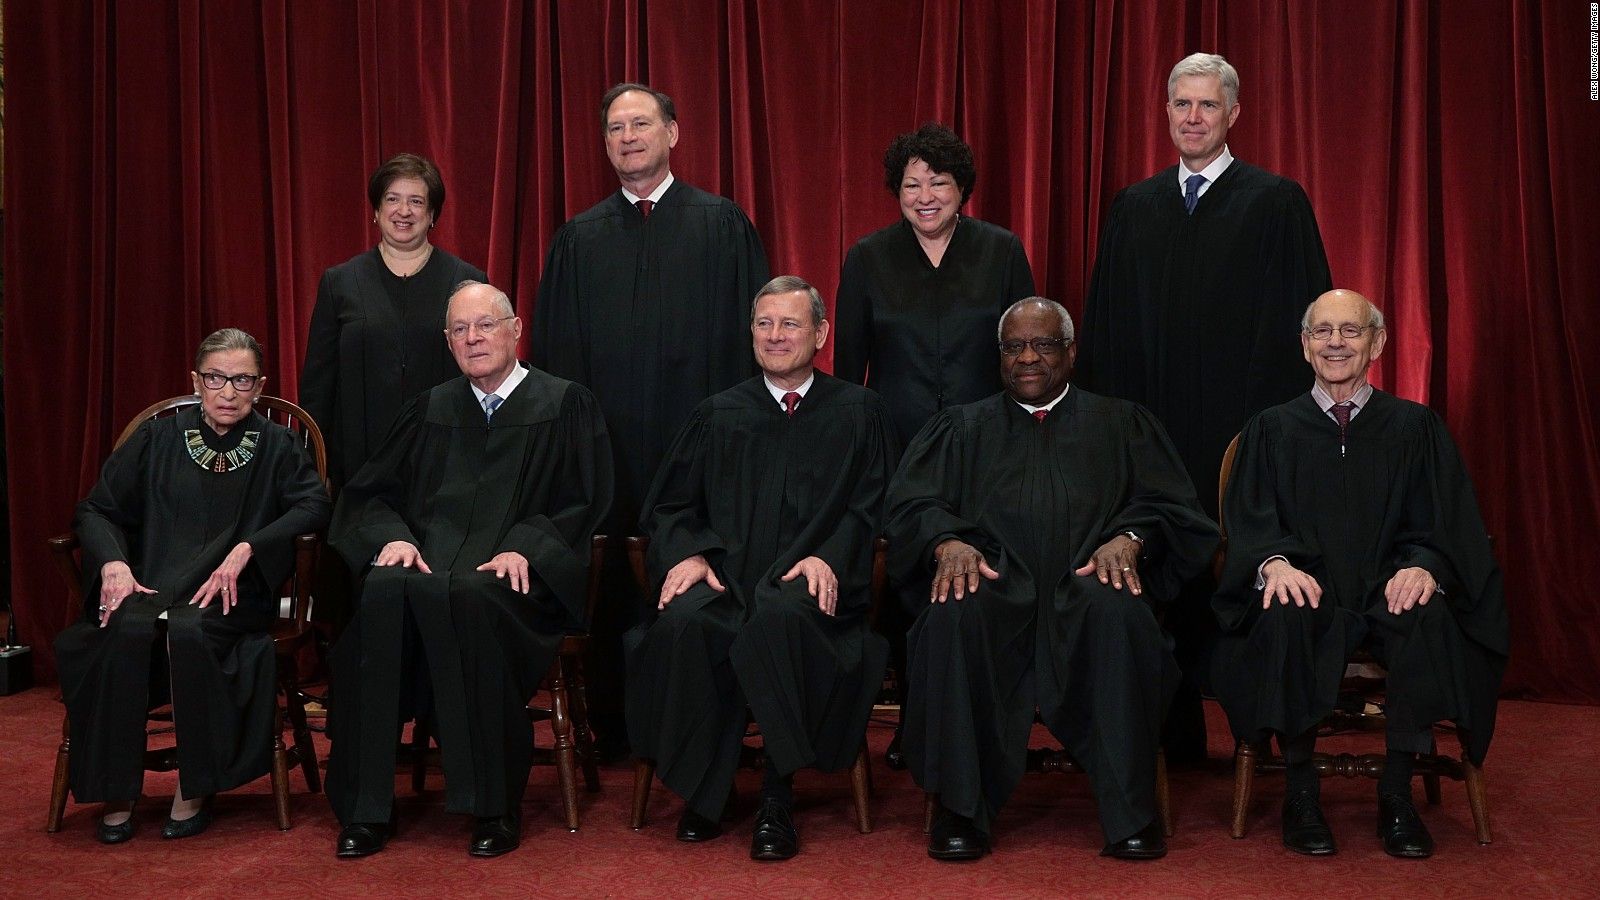 Just how old are the Supreme Court justices?